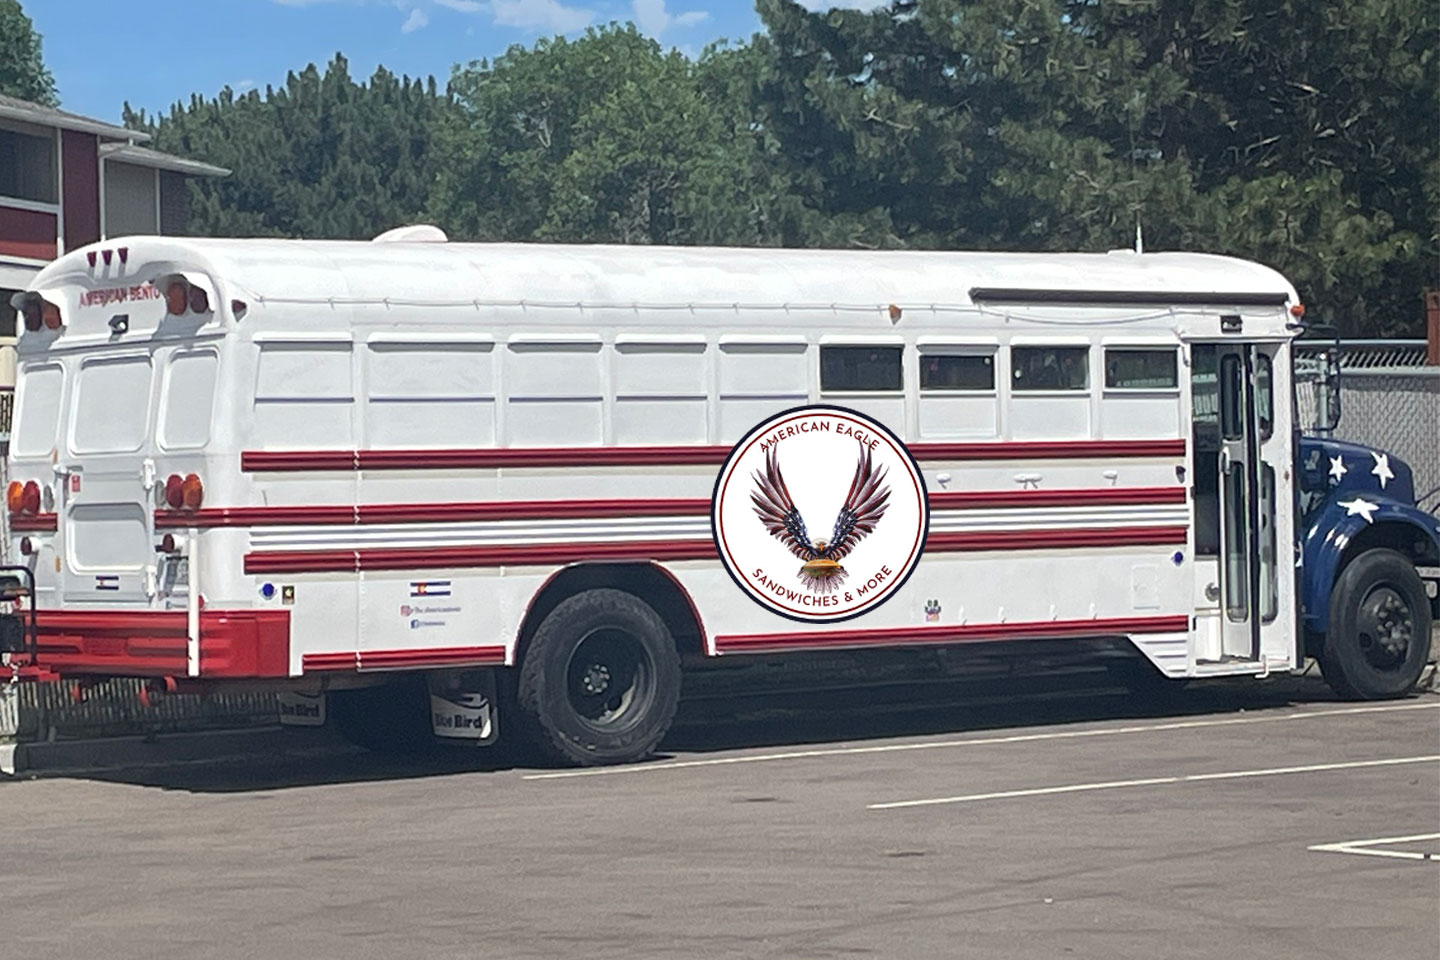 The American Eagle Bus is a woman & veteran owned and operated mobile food bus that offers signature sandwiches, or you can create your own. https://www.facebook.com/TheAmericanEagleBus